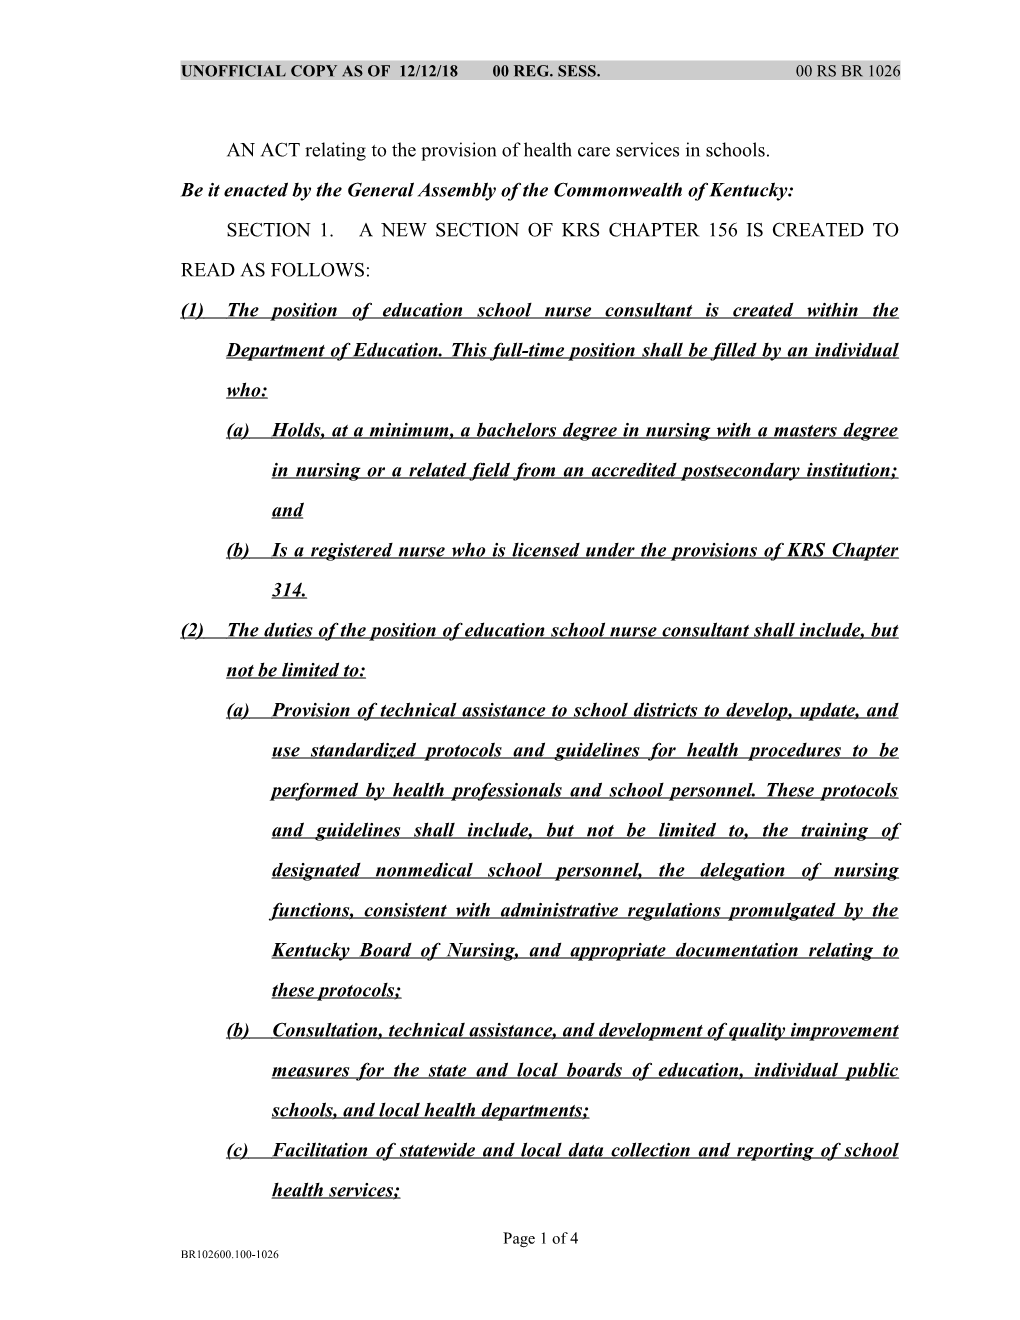 AN ACT Relating to the Provision of Health Care Services in Schools